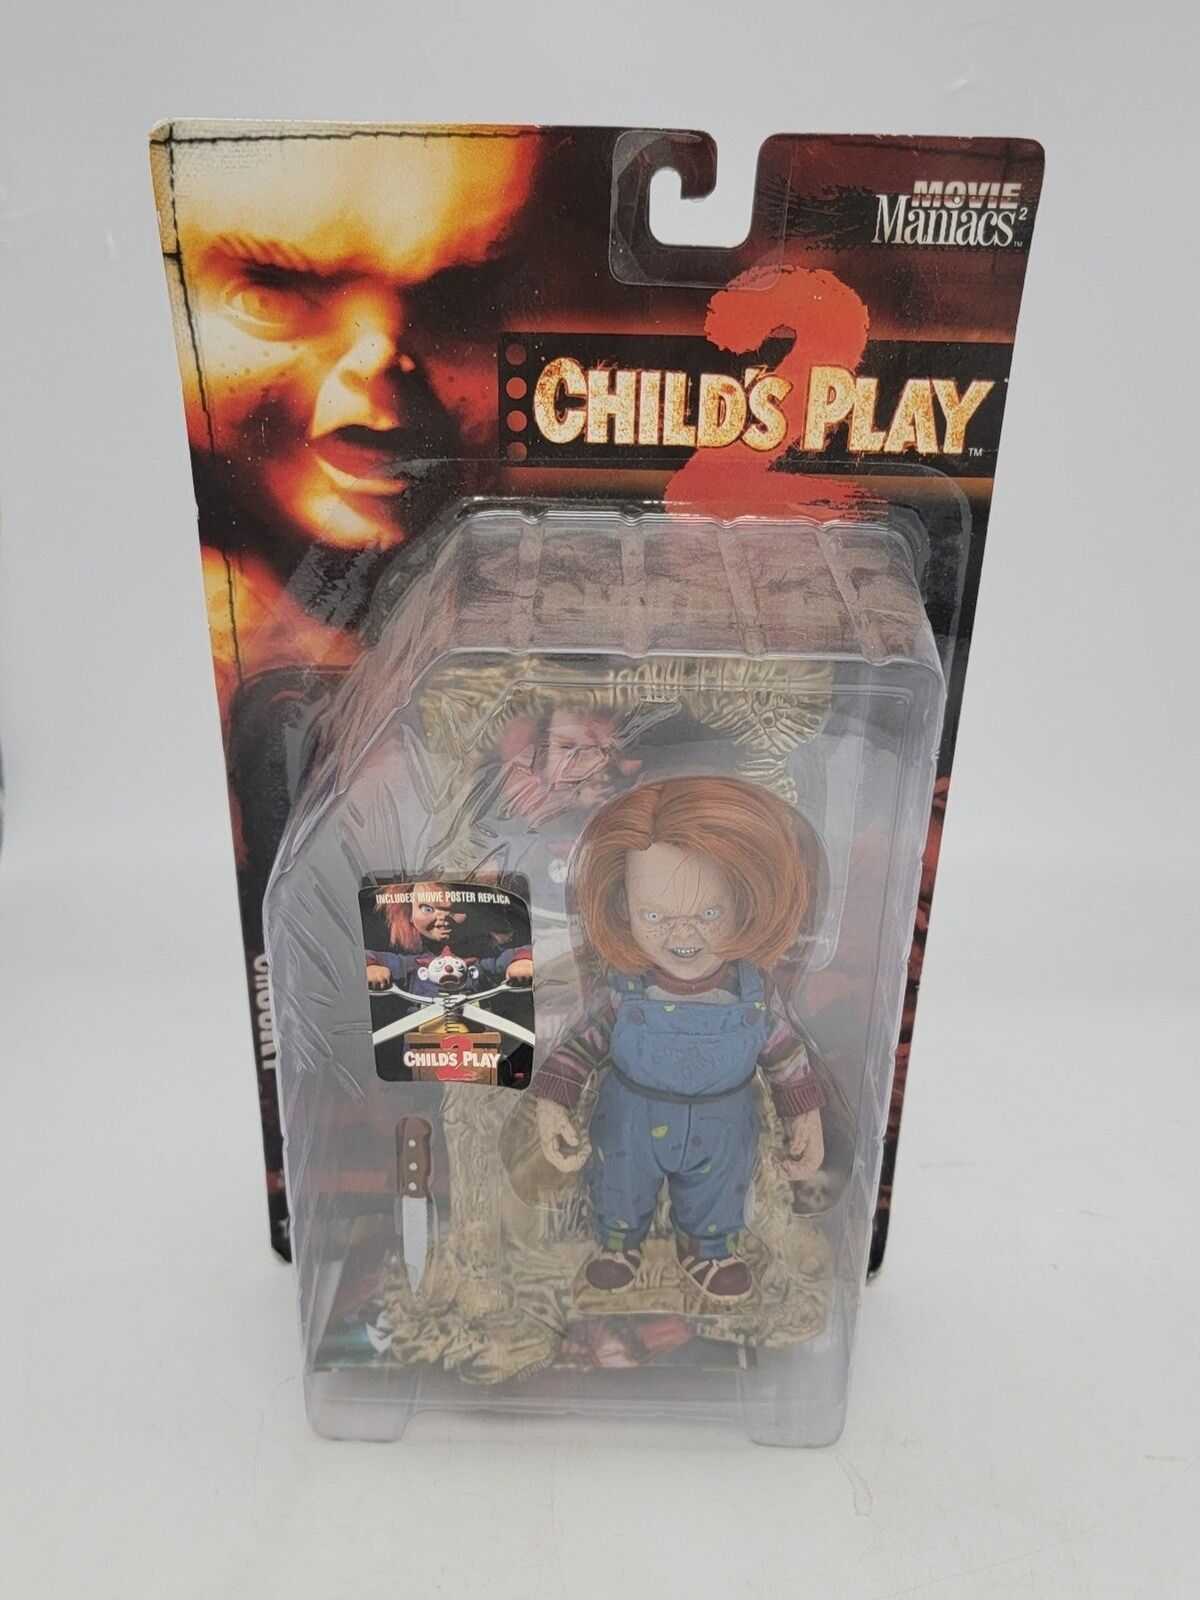 Movie Maniacs Child's Play 2 Chucky Action Figure